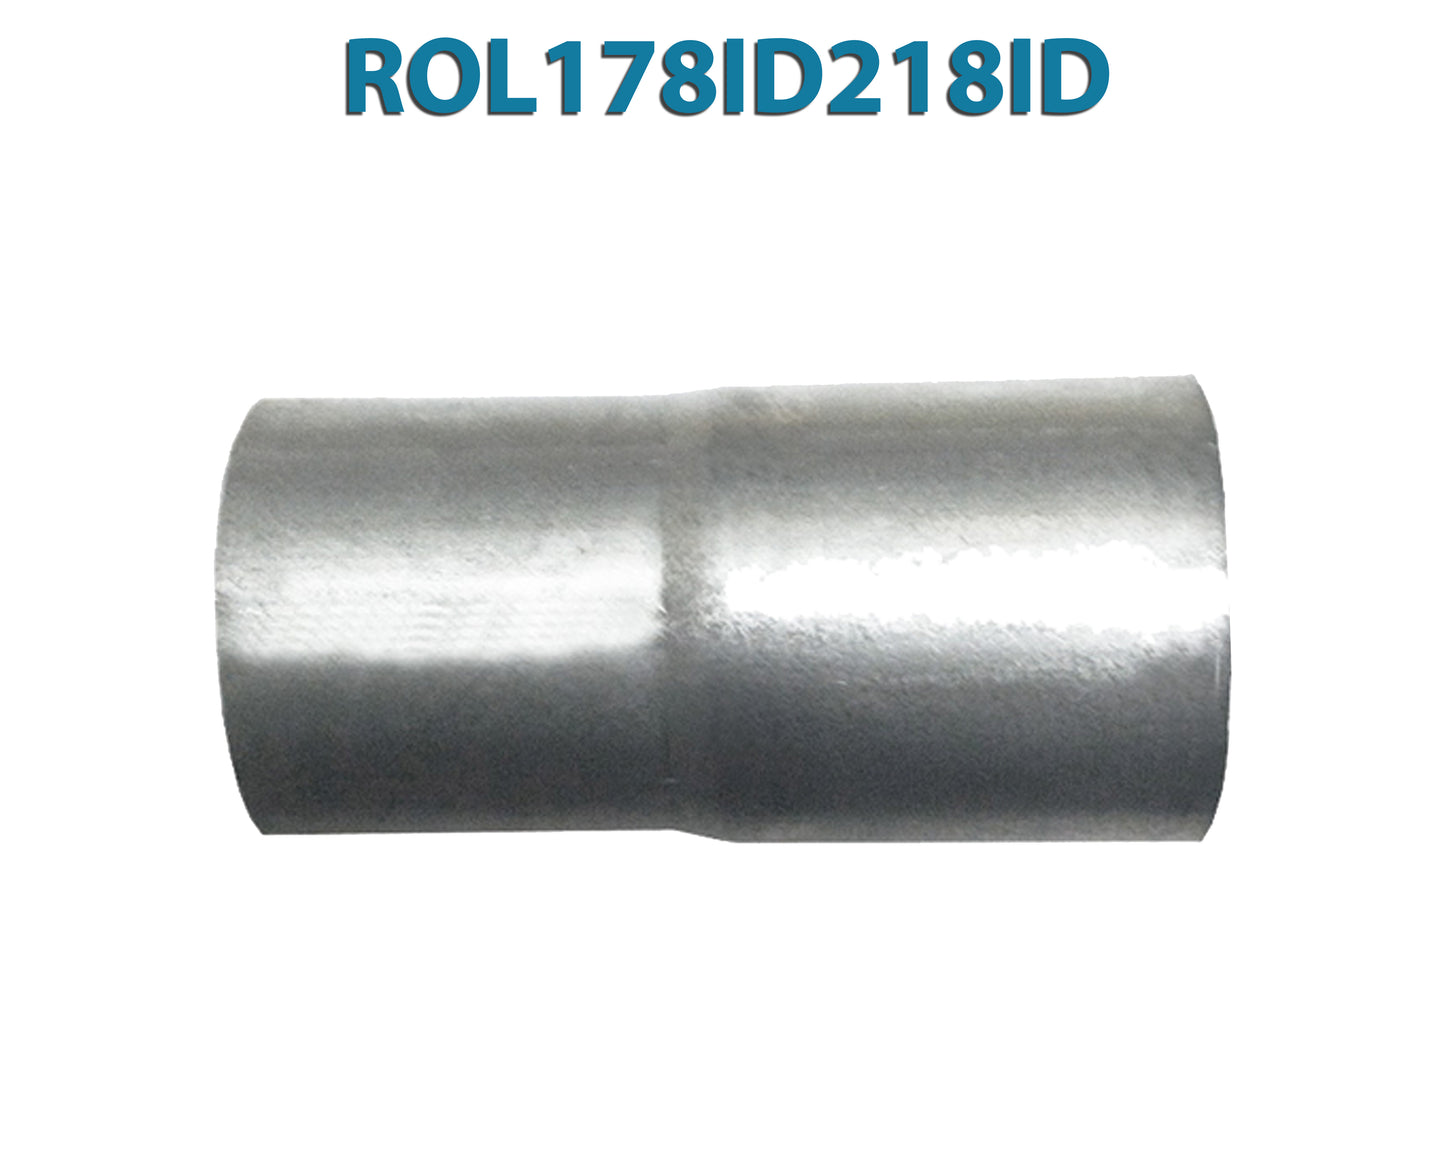 ROL178ID218ID 548542 1 7/8” ID to 2 1/8” ID Universal Exhaust Pipe to Pipe Adapter Reducer